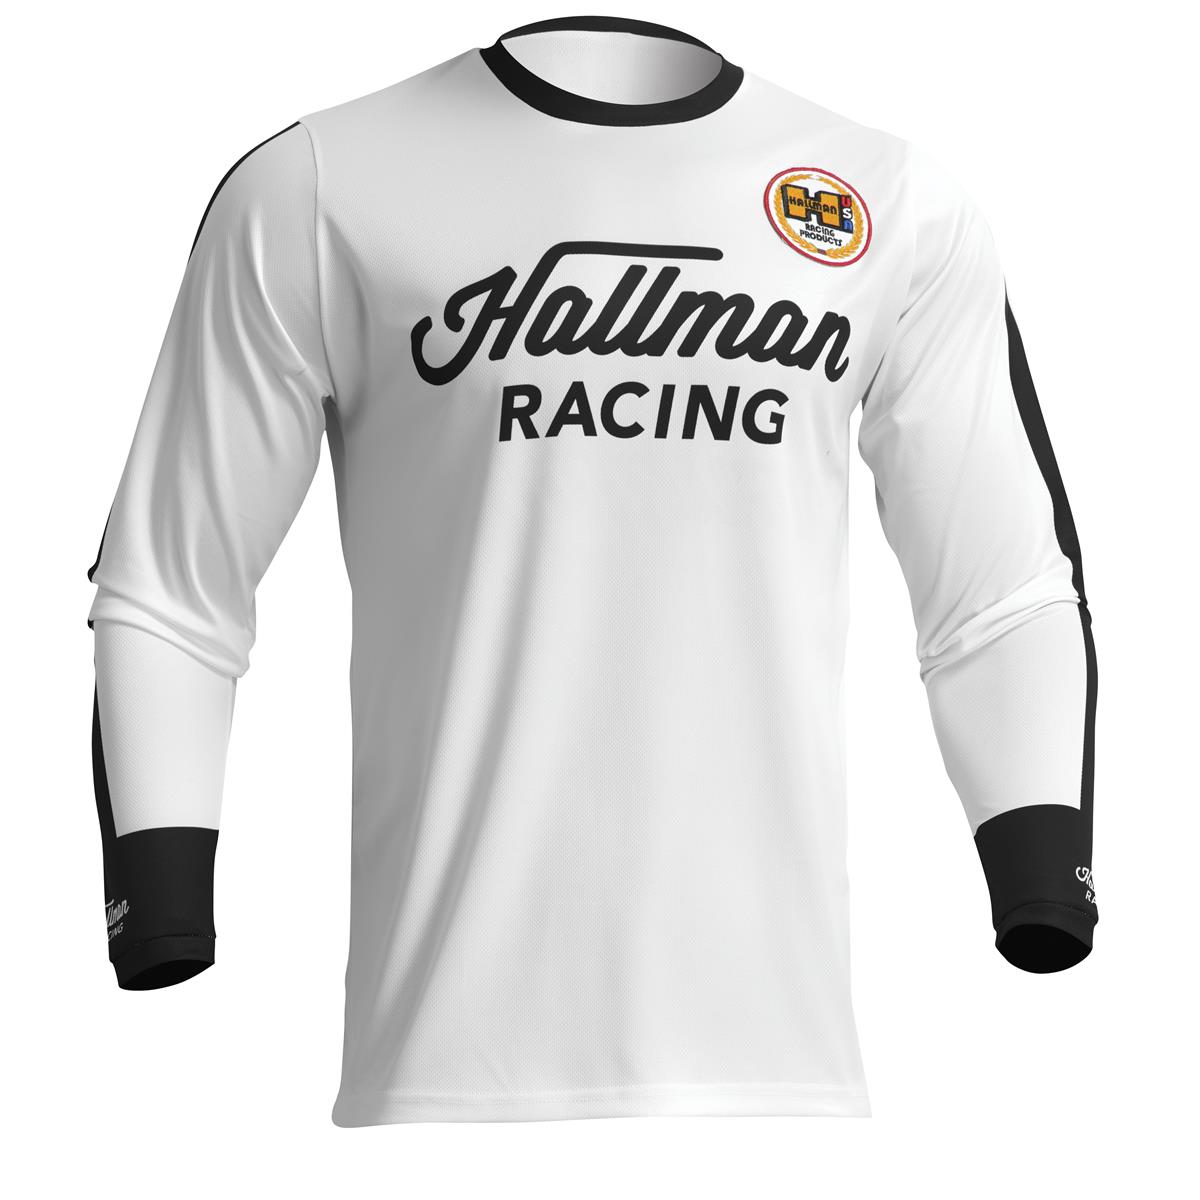 Thor MX Jersey Differ Roosted - White/Black